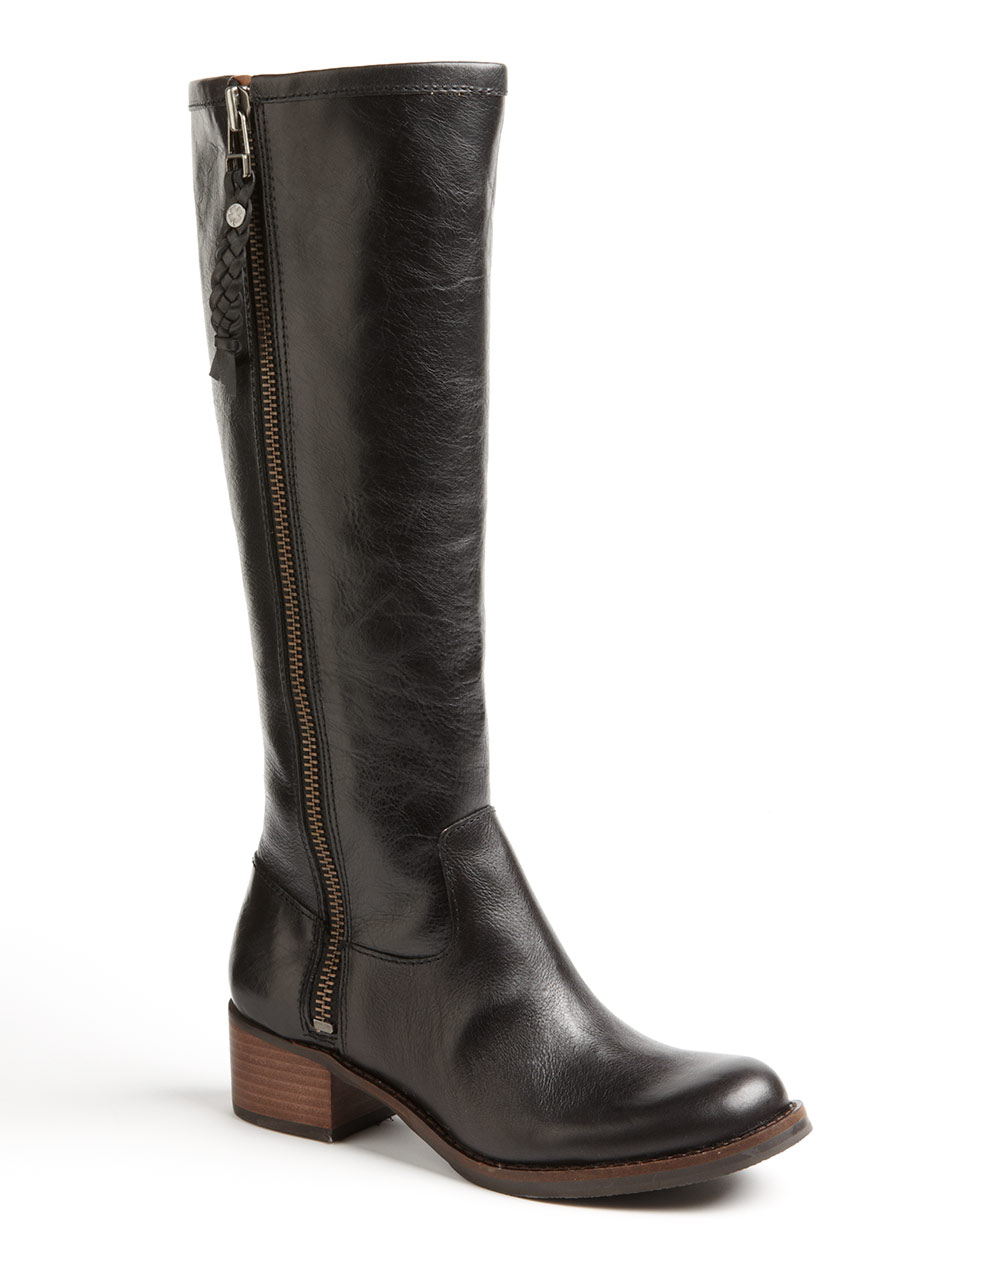 Lucky Brand Hesper Tall Leather Boots in Black Leather (Black) - Lyst